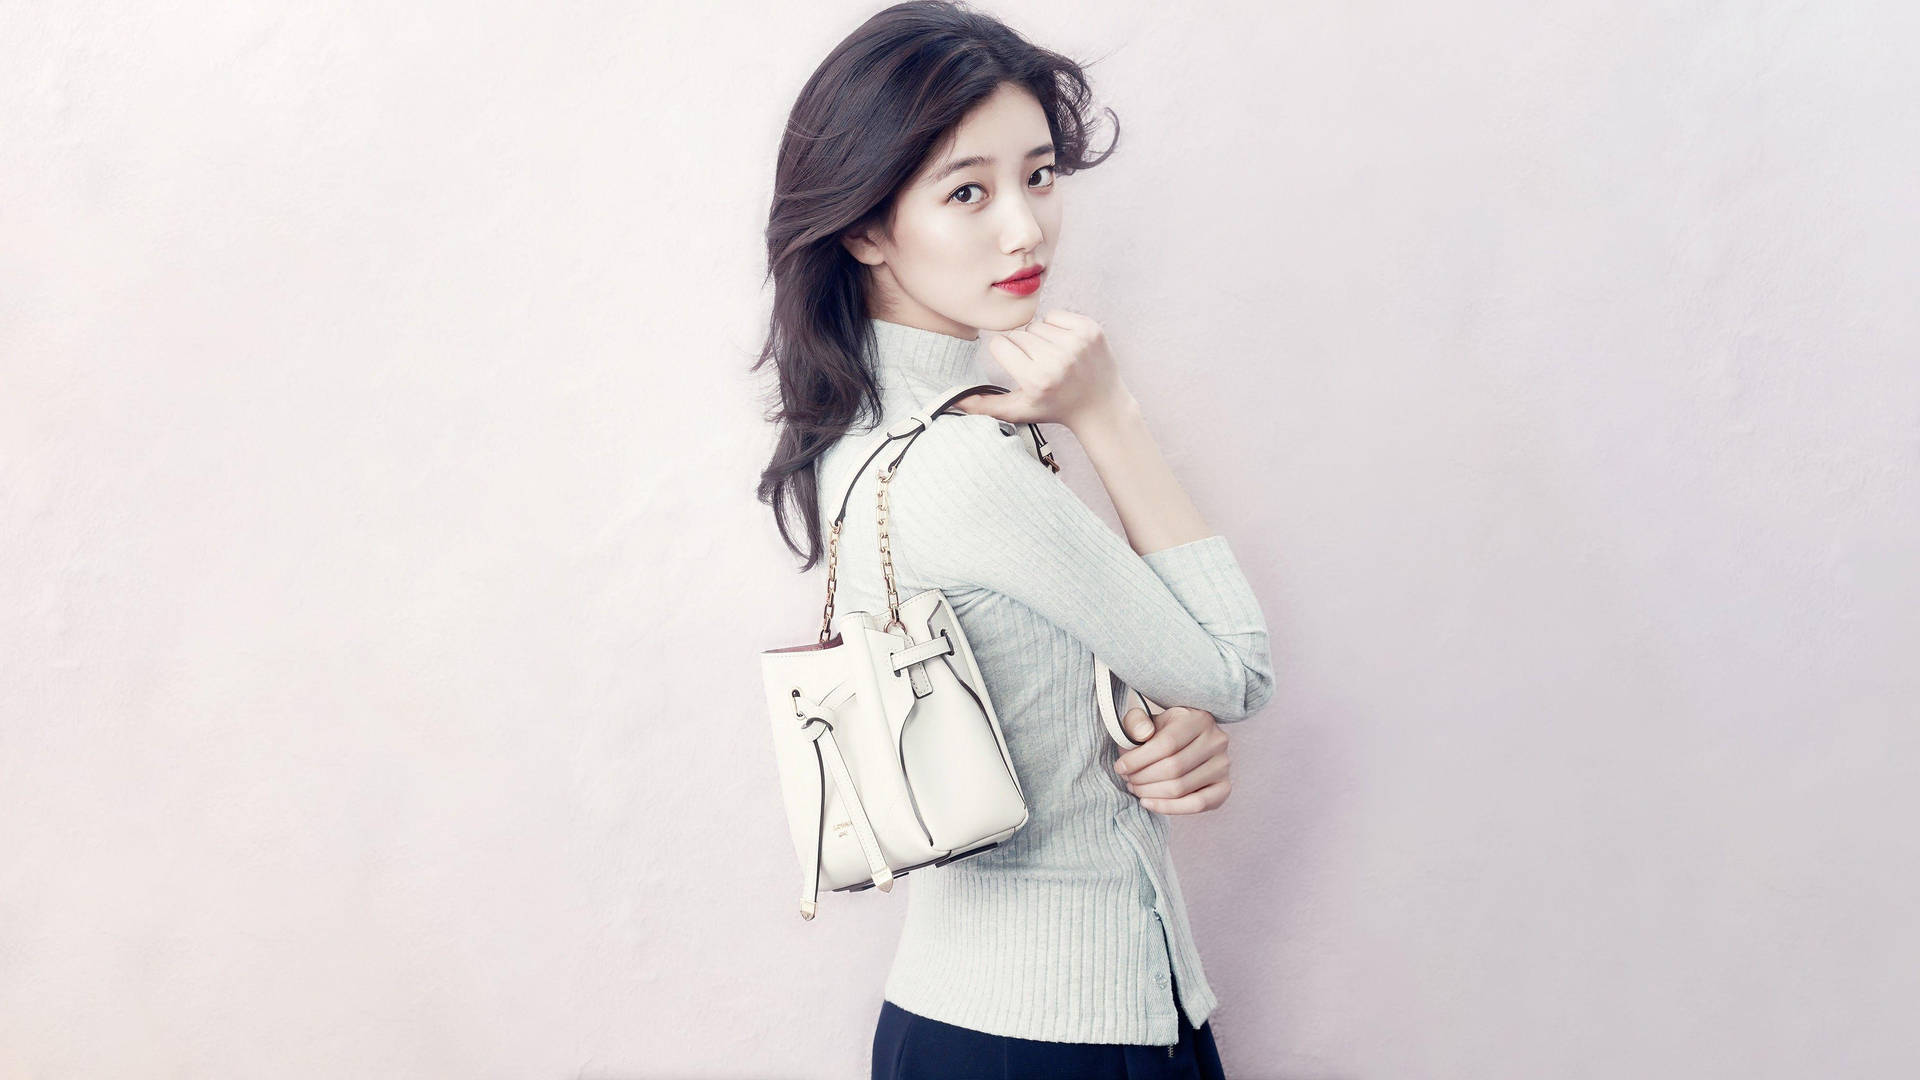 Bae Suzy With Bag Wallpaper